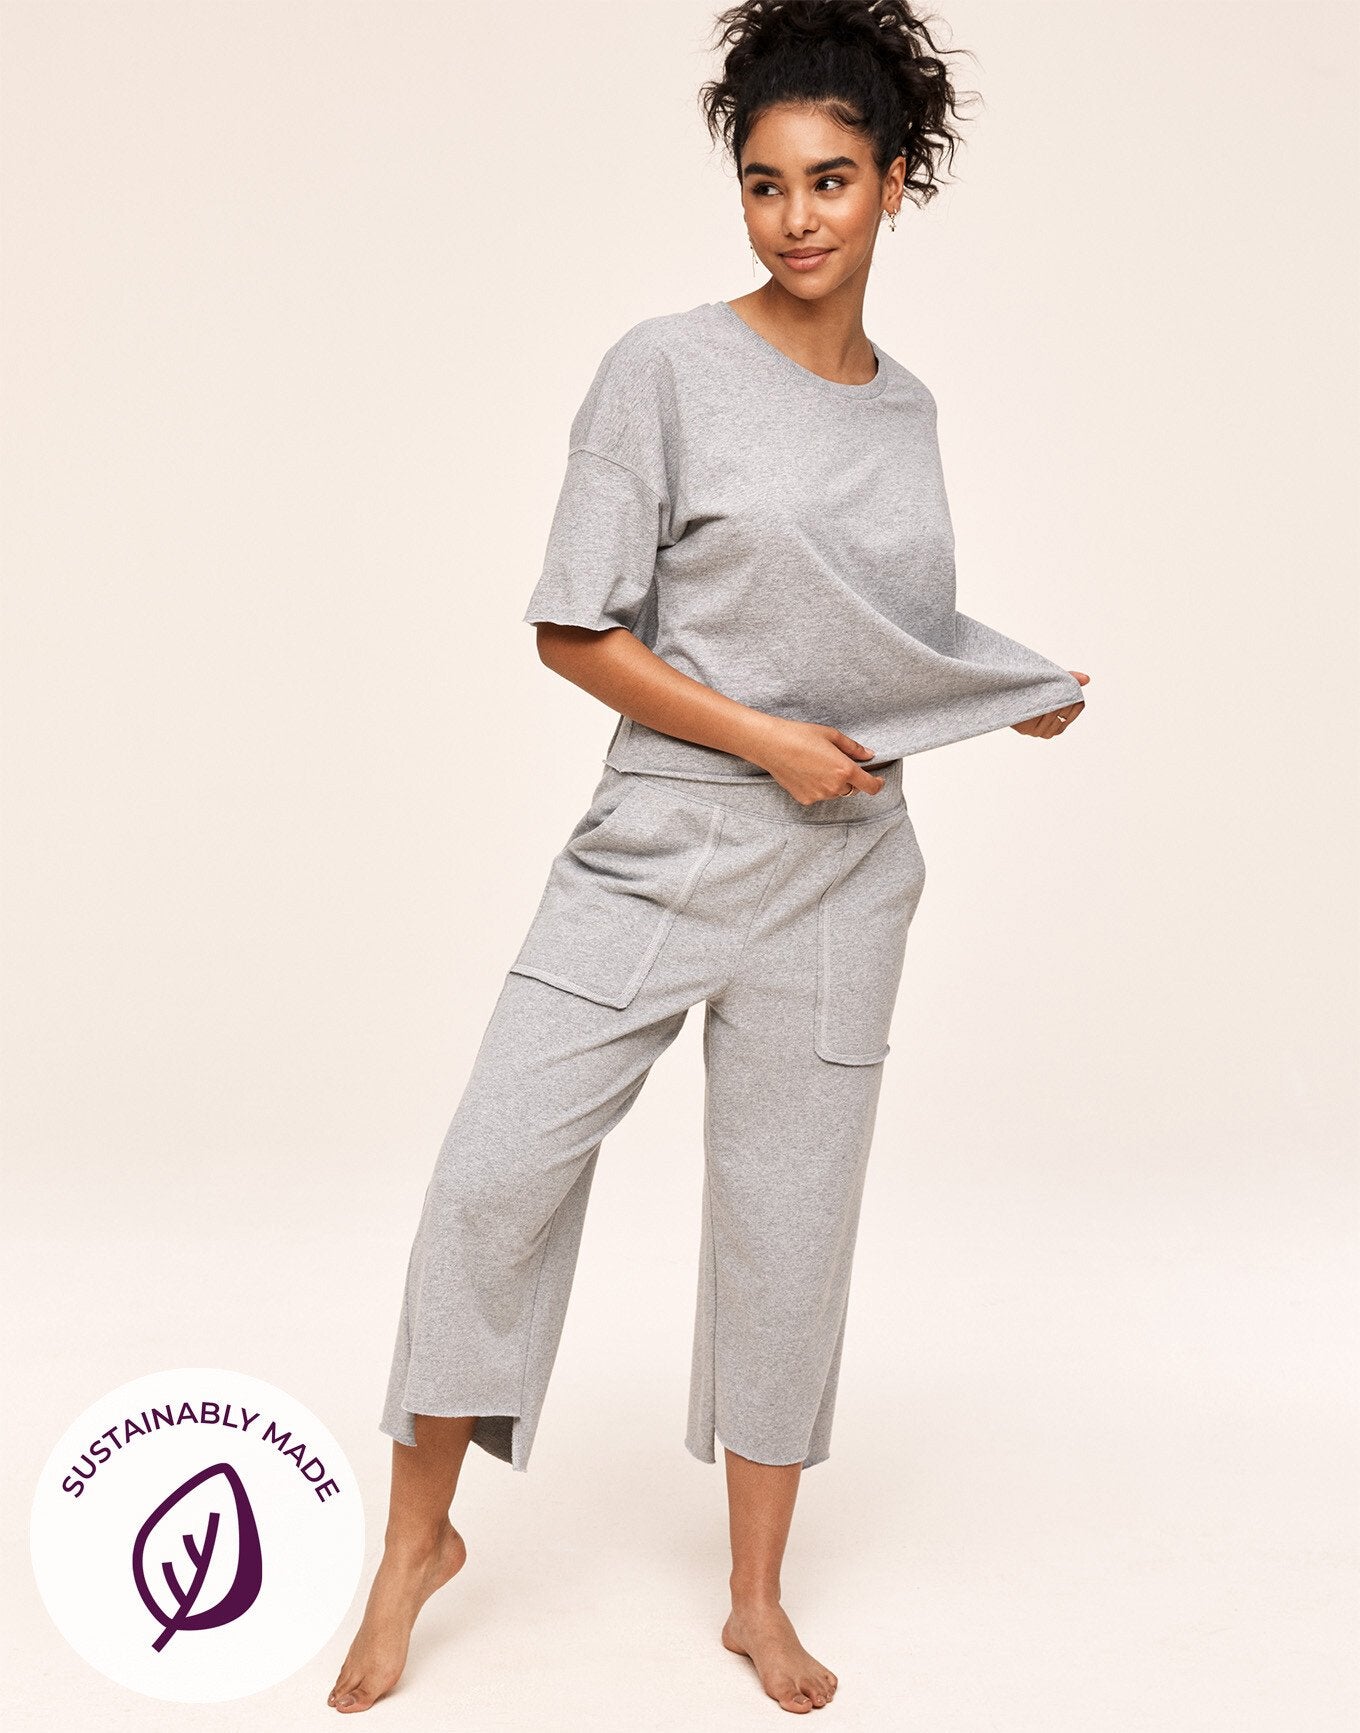 Adore Me Avery T-Shirt & Sweatpant Set in color Light Heather Gray and shape pj